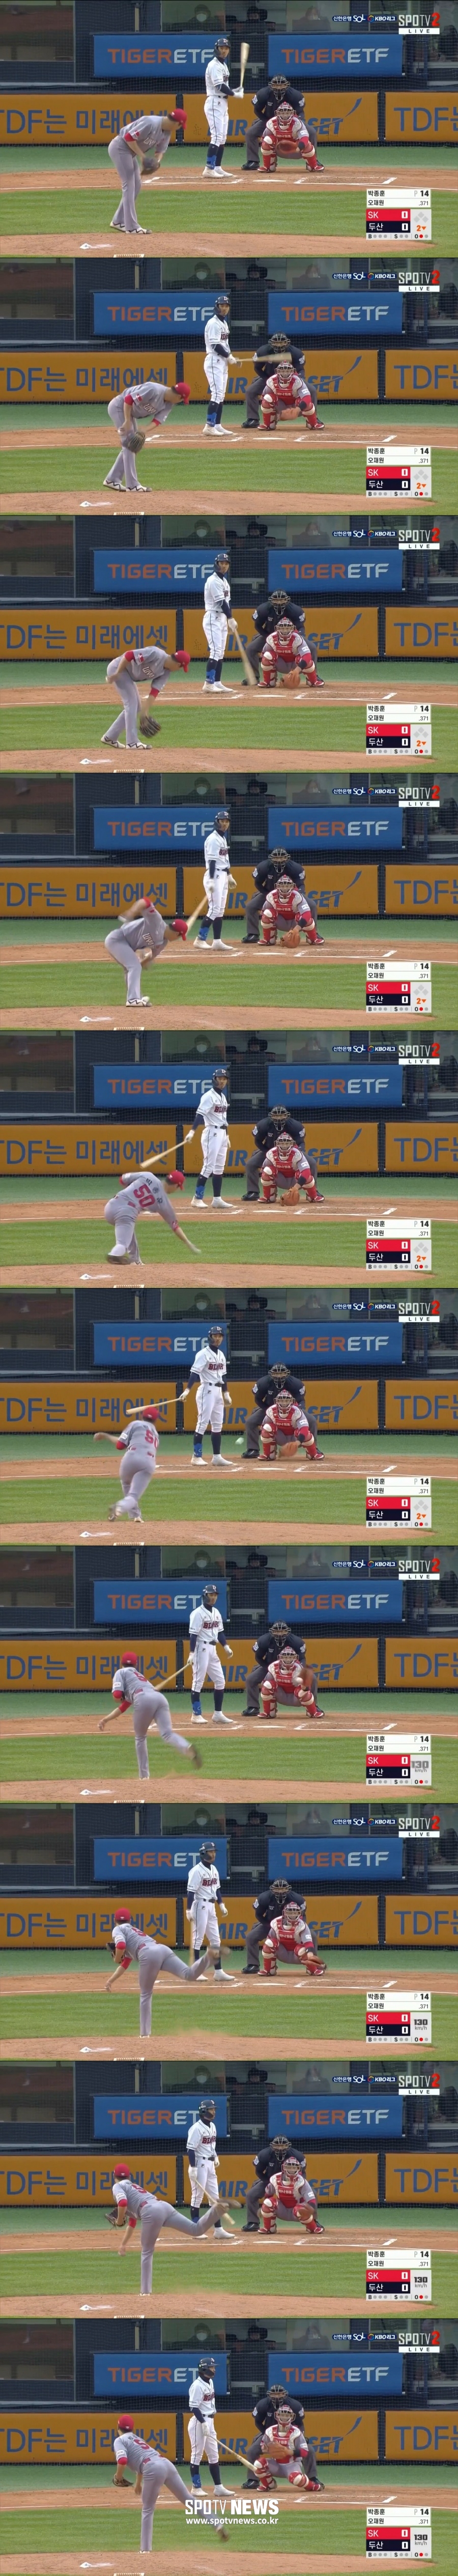 Rob Friedman, who analyzes pitching videos of major league pitchers on SNS Twitter, posted a hit video of KBO League Oh Jae-won on the 27th (Korea time).The United States of America baseball fans heated debate on whether Oh Jae-wons actions were swinging or not followed.Oh Jae-won, who started as a second baseman with five batters in SK Wyverns and Kyonggi on the 26th, started his first at-bat in Kyonggi when he did not have a runner in the second inning.When SK starter Park Jong-hun entered the pitch, Oh Jae-won lowered his bat and appeared to be unwilling to strike; Park Jong-hun was the ball.United States of America fans in that posture said Hut Swing.This is for all the comments that are called Swing...is he trying to hit the ball, Friedman said, not Swing.Friedman insisted that Oh Jae-wons actions were not Swing.Depend Detroit, which saw Friedmans post, asked, Is not it technically Swing?Swing is an attempt to hit the ball, but this is not, said Christopher Bevan.Jay said, It is far from the ball, but when the bat goes back, it is swinging. Oh Jae-wons behavior is a swing.The definition of the strike means that the batter should try to contact the ball, said Boros McCracken. His actions are not swinging.Lee Min-ho, who was in Kyonggi as a referee on the day, said, Swing or not judge and declare the act of the batter trying to attack.I think its hard to declare Swing with this scene, said Judge Kang Kwang-hoe, who was chief referee of Jamsil Kyonggi, who also said, I have no will to strike, its No Swing.I can not see it as a swing, it is not a batting act, said Huun, chairman of the referee.Even without the intention of attacking, there are times when a swing is made to avoid the ball coming in deep into the body, which is a swing that comes from a situation where there is no will to attack.Responding, referee Lee Min-ho added: In a move that is clearly trying to avoid, we do not declare Swing.However, when the ball is fouled by the bat, it is declared as a foul regardless of the intention of the strike.